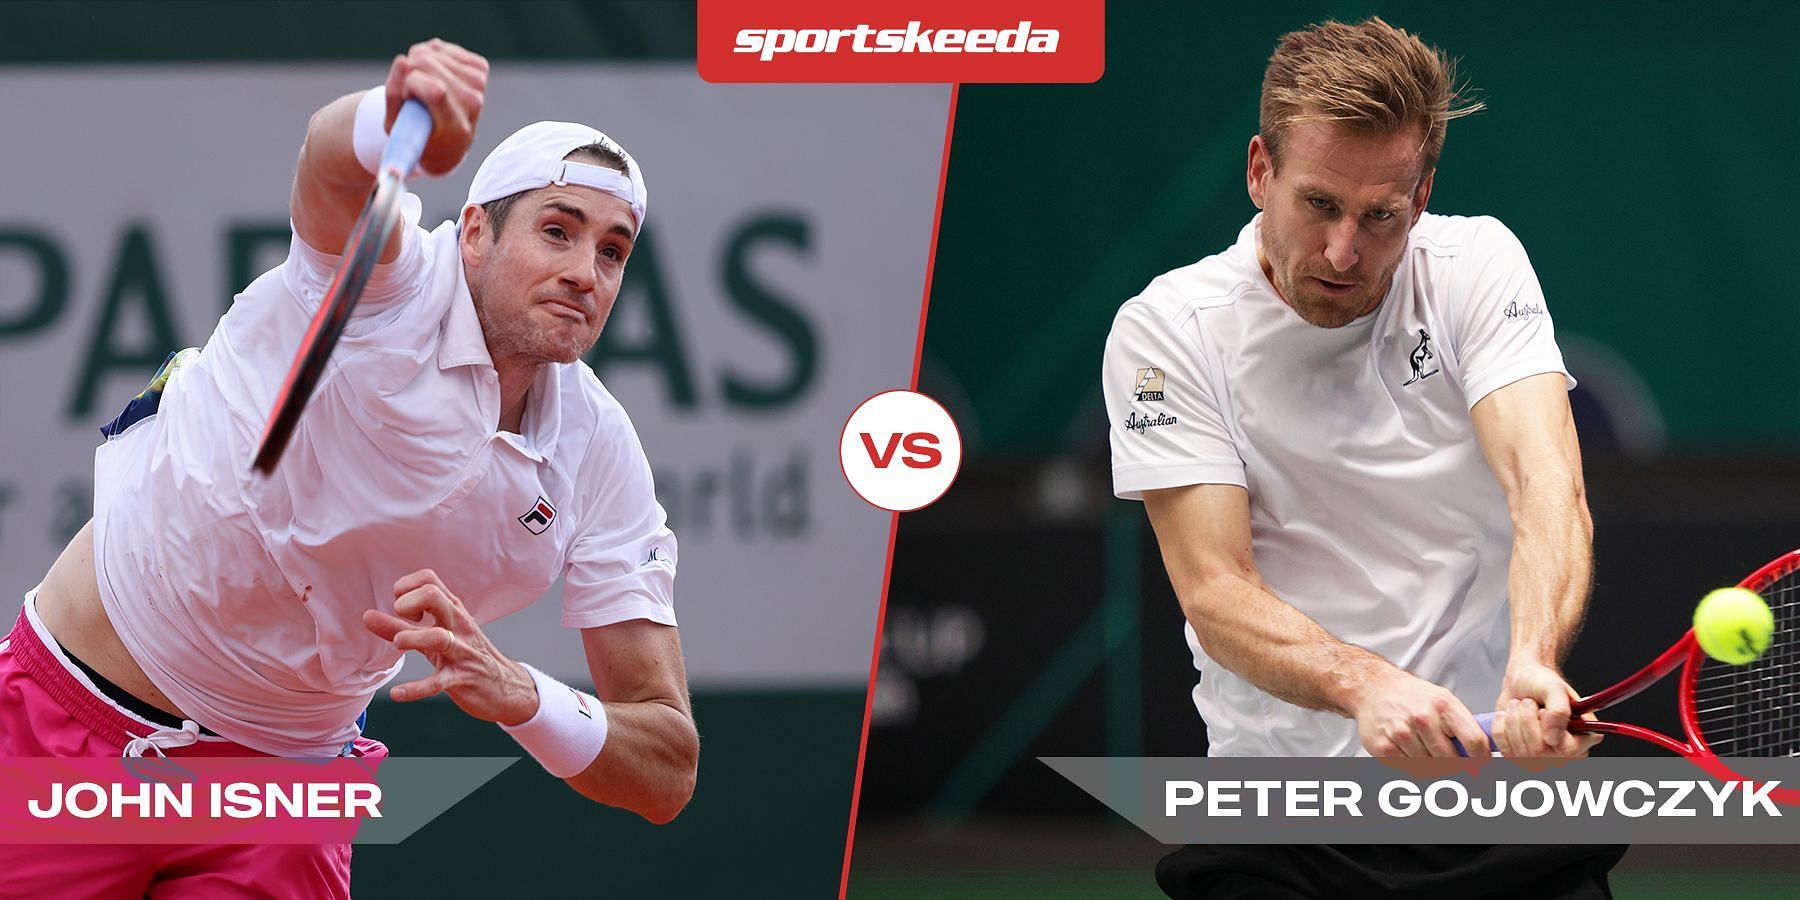 John Isner (L) will face Peter Gojowczyk in the second round of the Hall of Fame Open